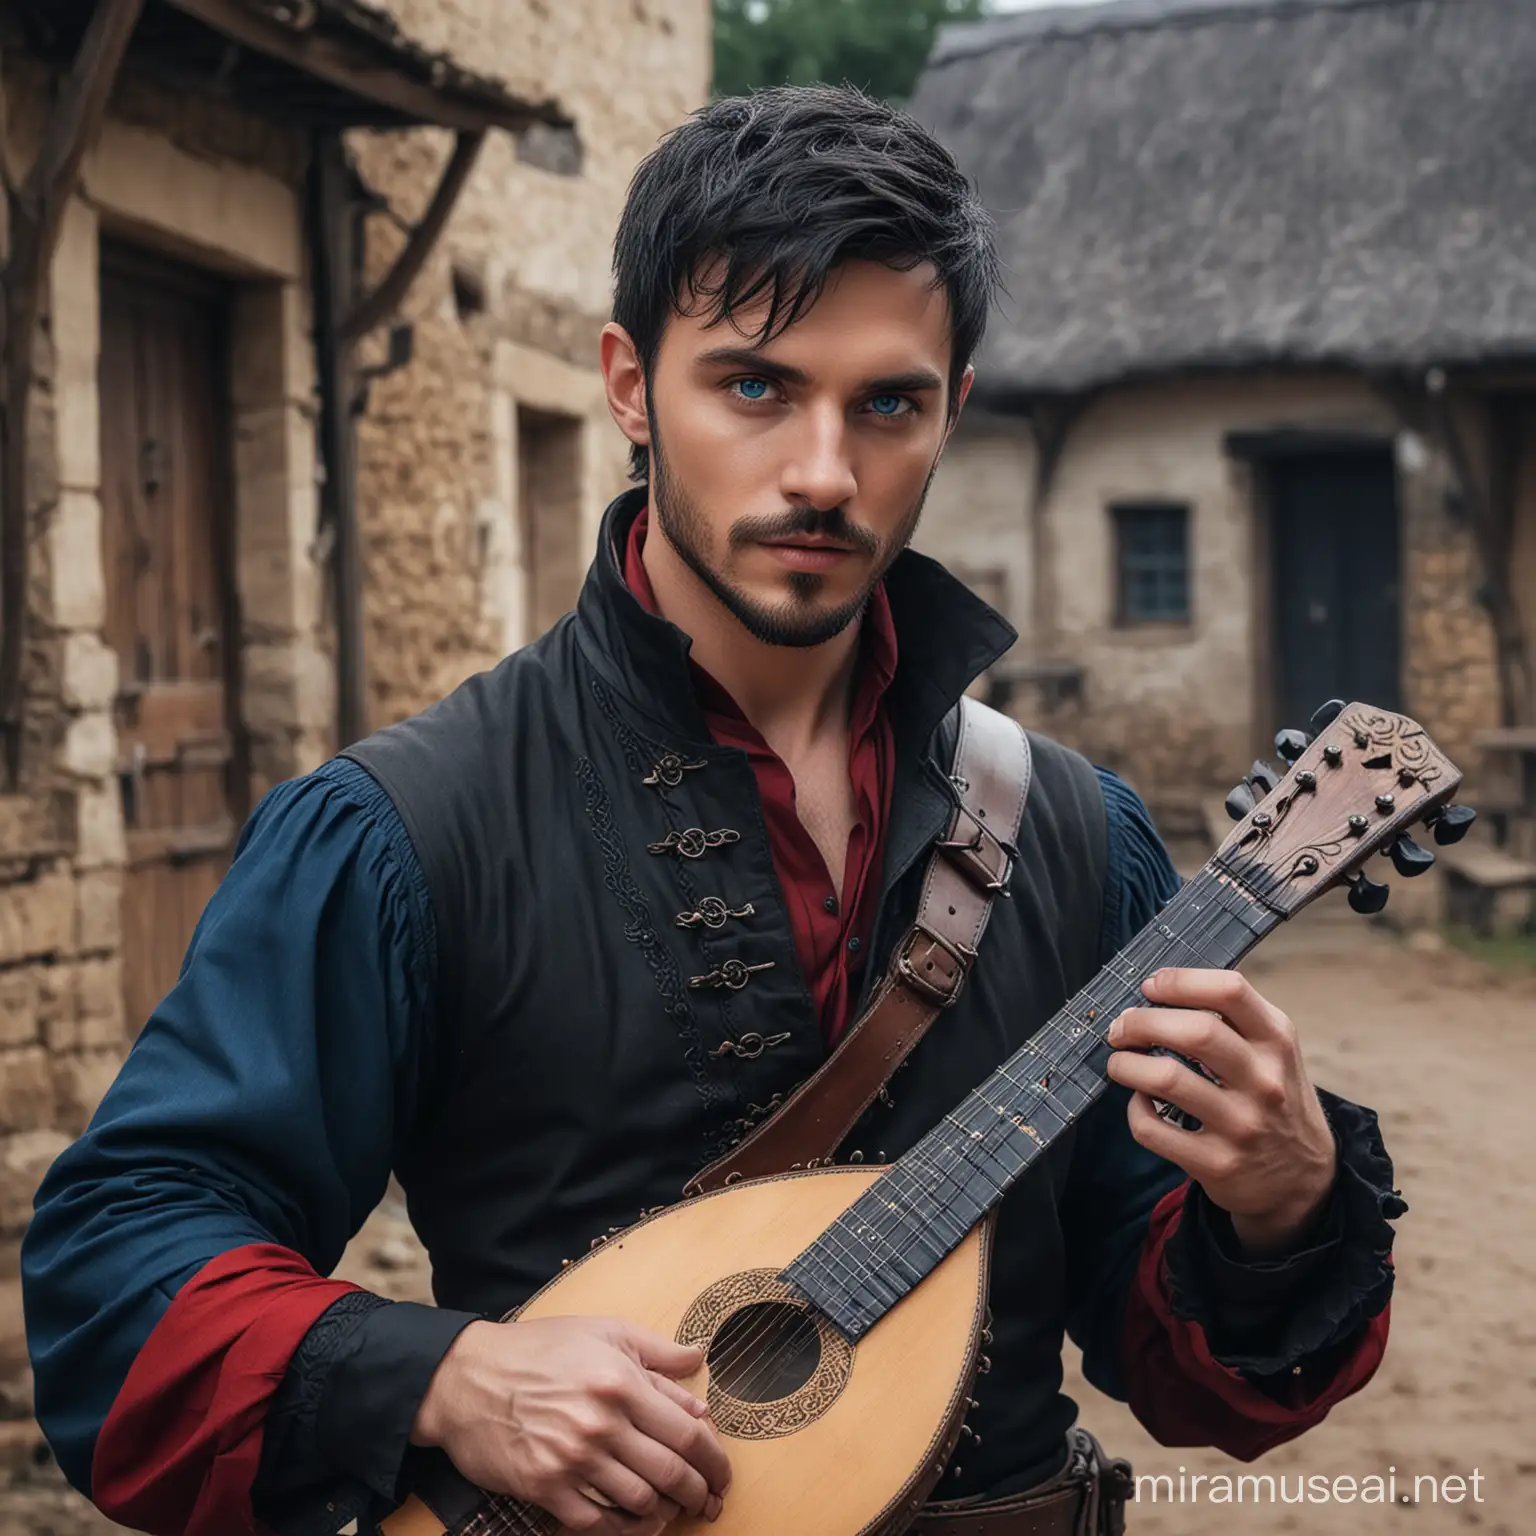 Fantasy Bard Playing Lute in Enchanted Village